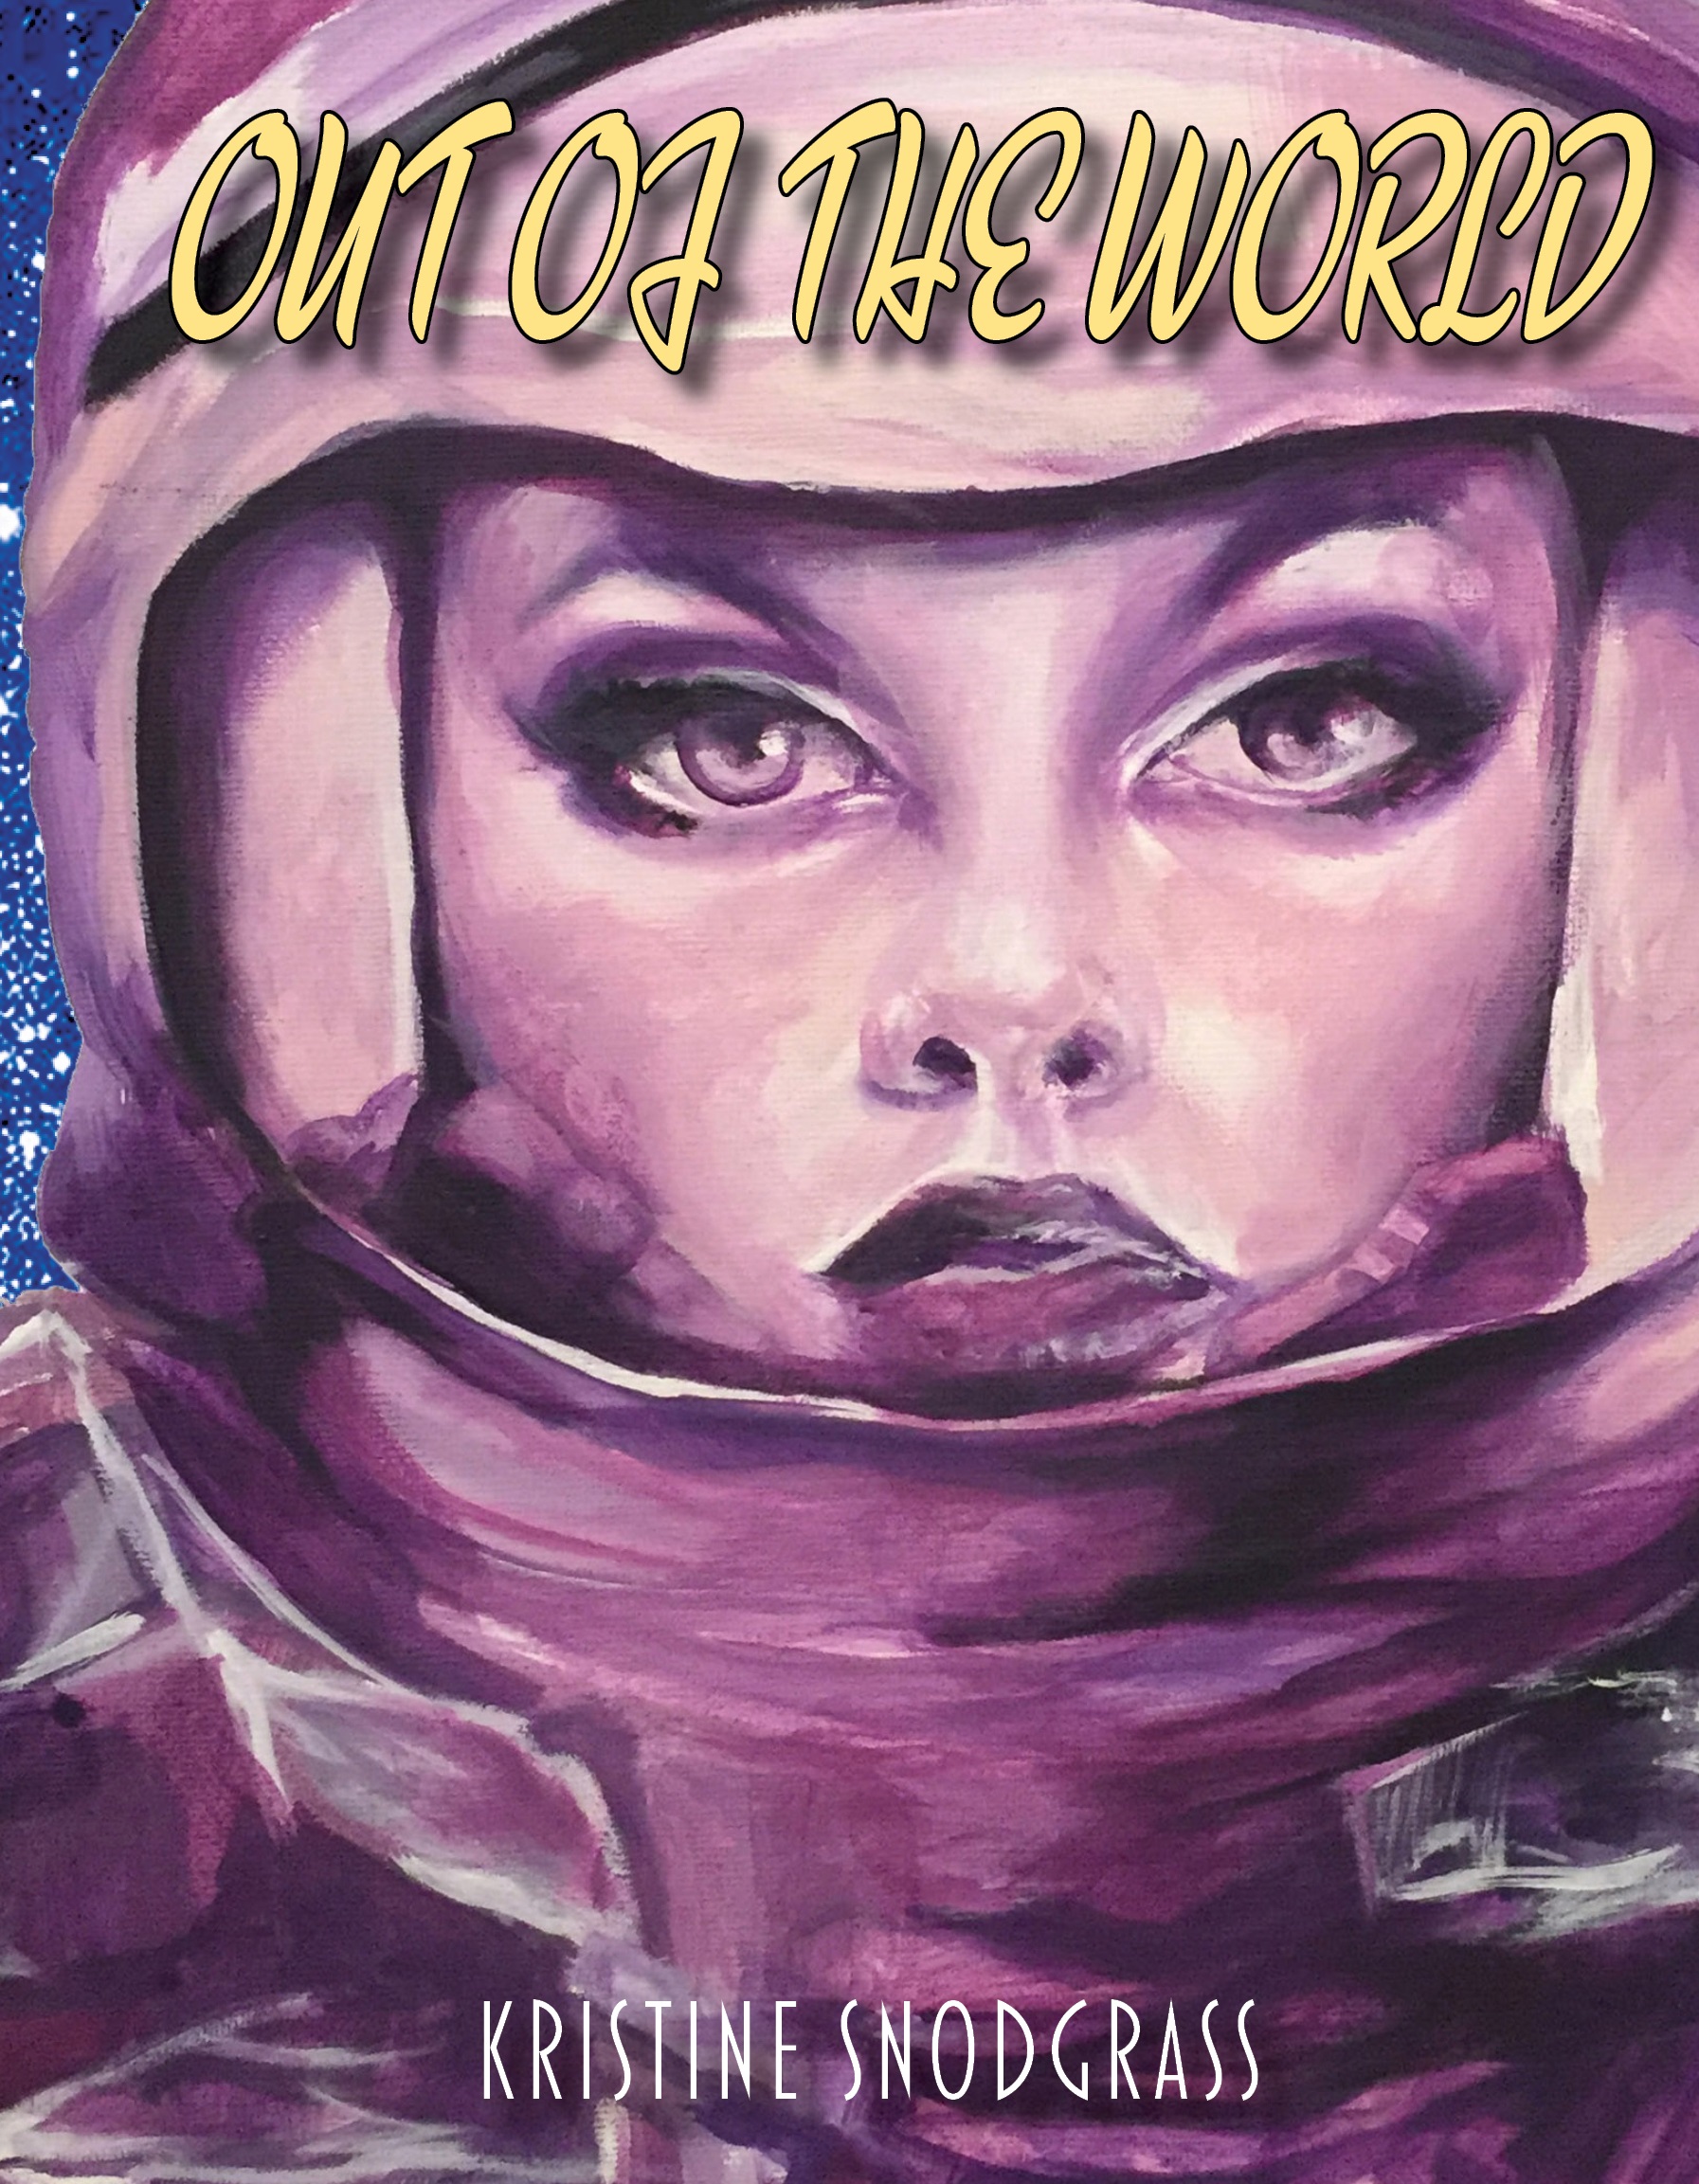 Out of the world cover.jpg